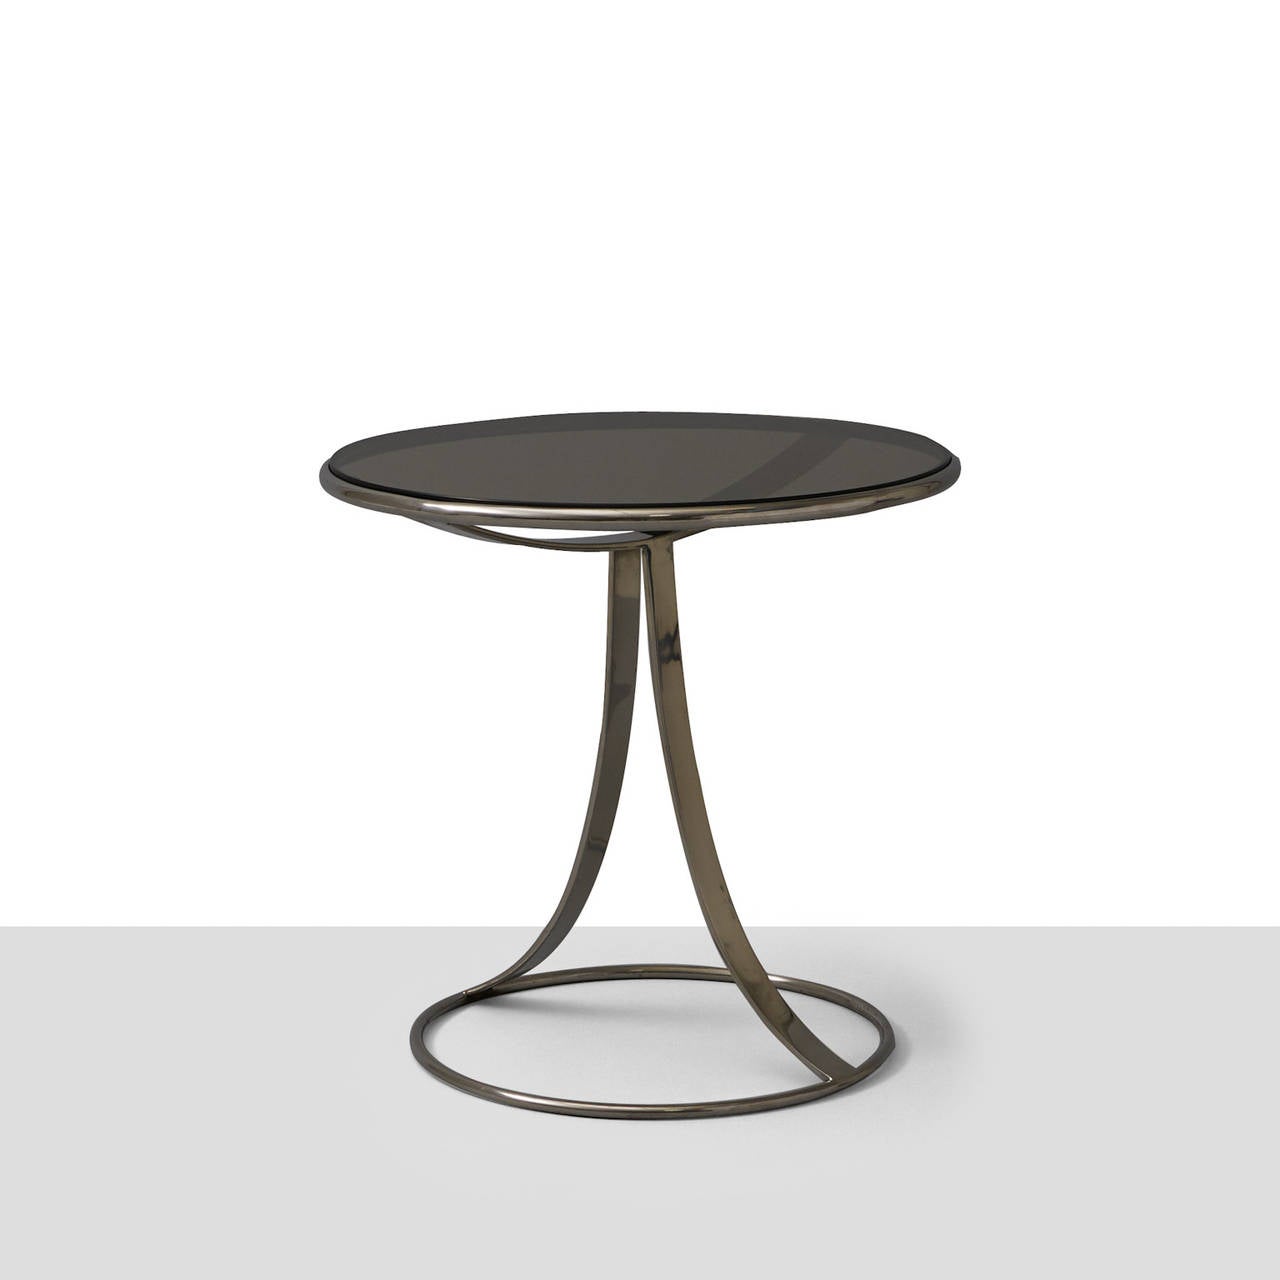 A pair of occasional tables by Gardner Leaver for Steelcase. Steel base and smoked glass table top.